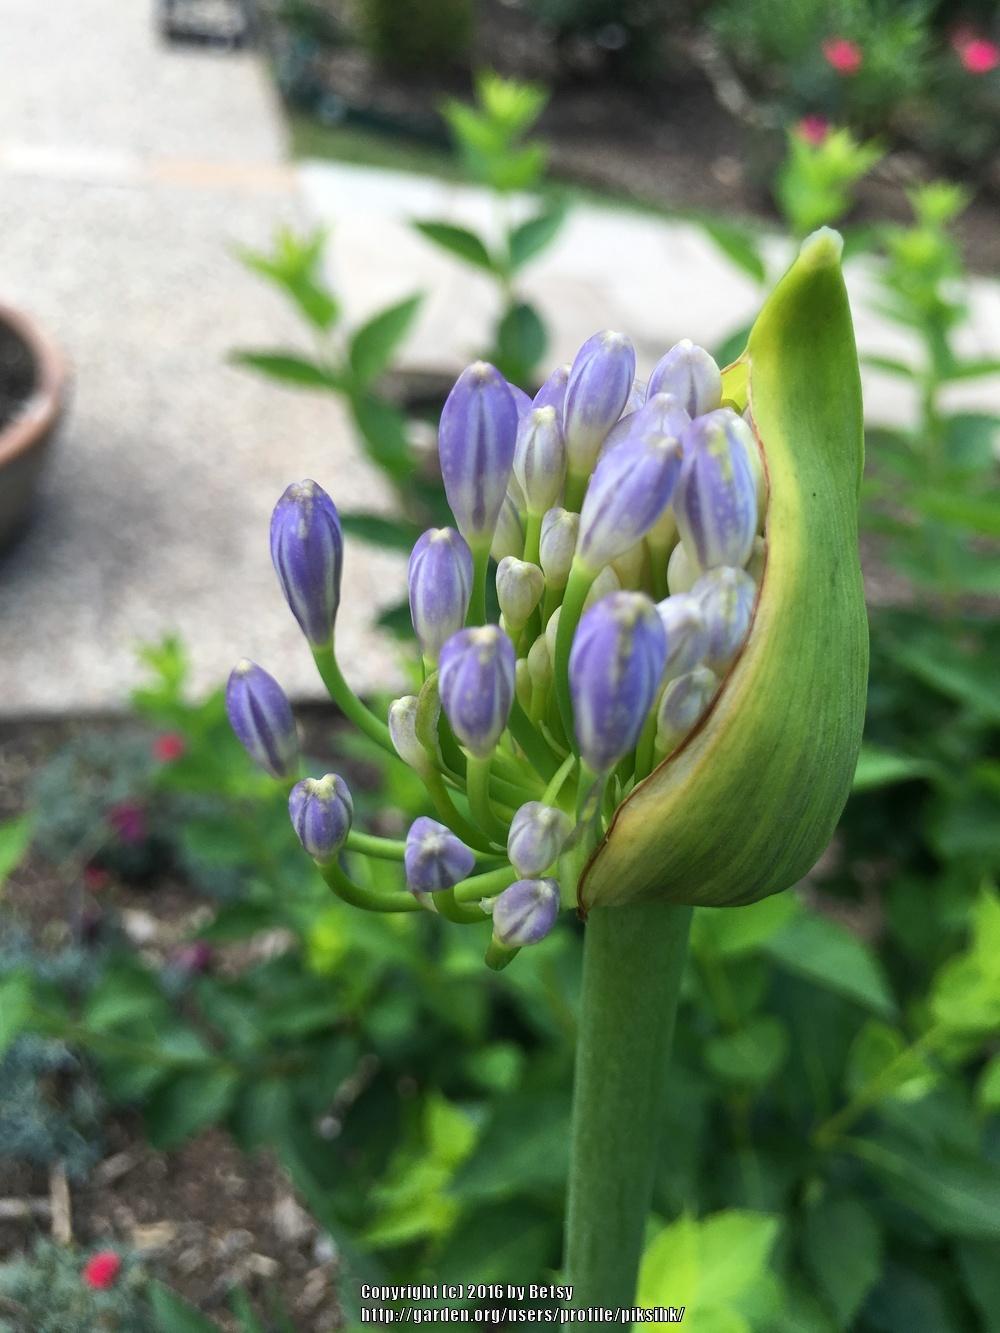 Photo of Lily of the Nile (Agapanthus) uploaded by piksihk